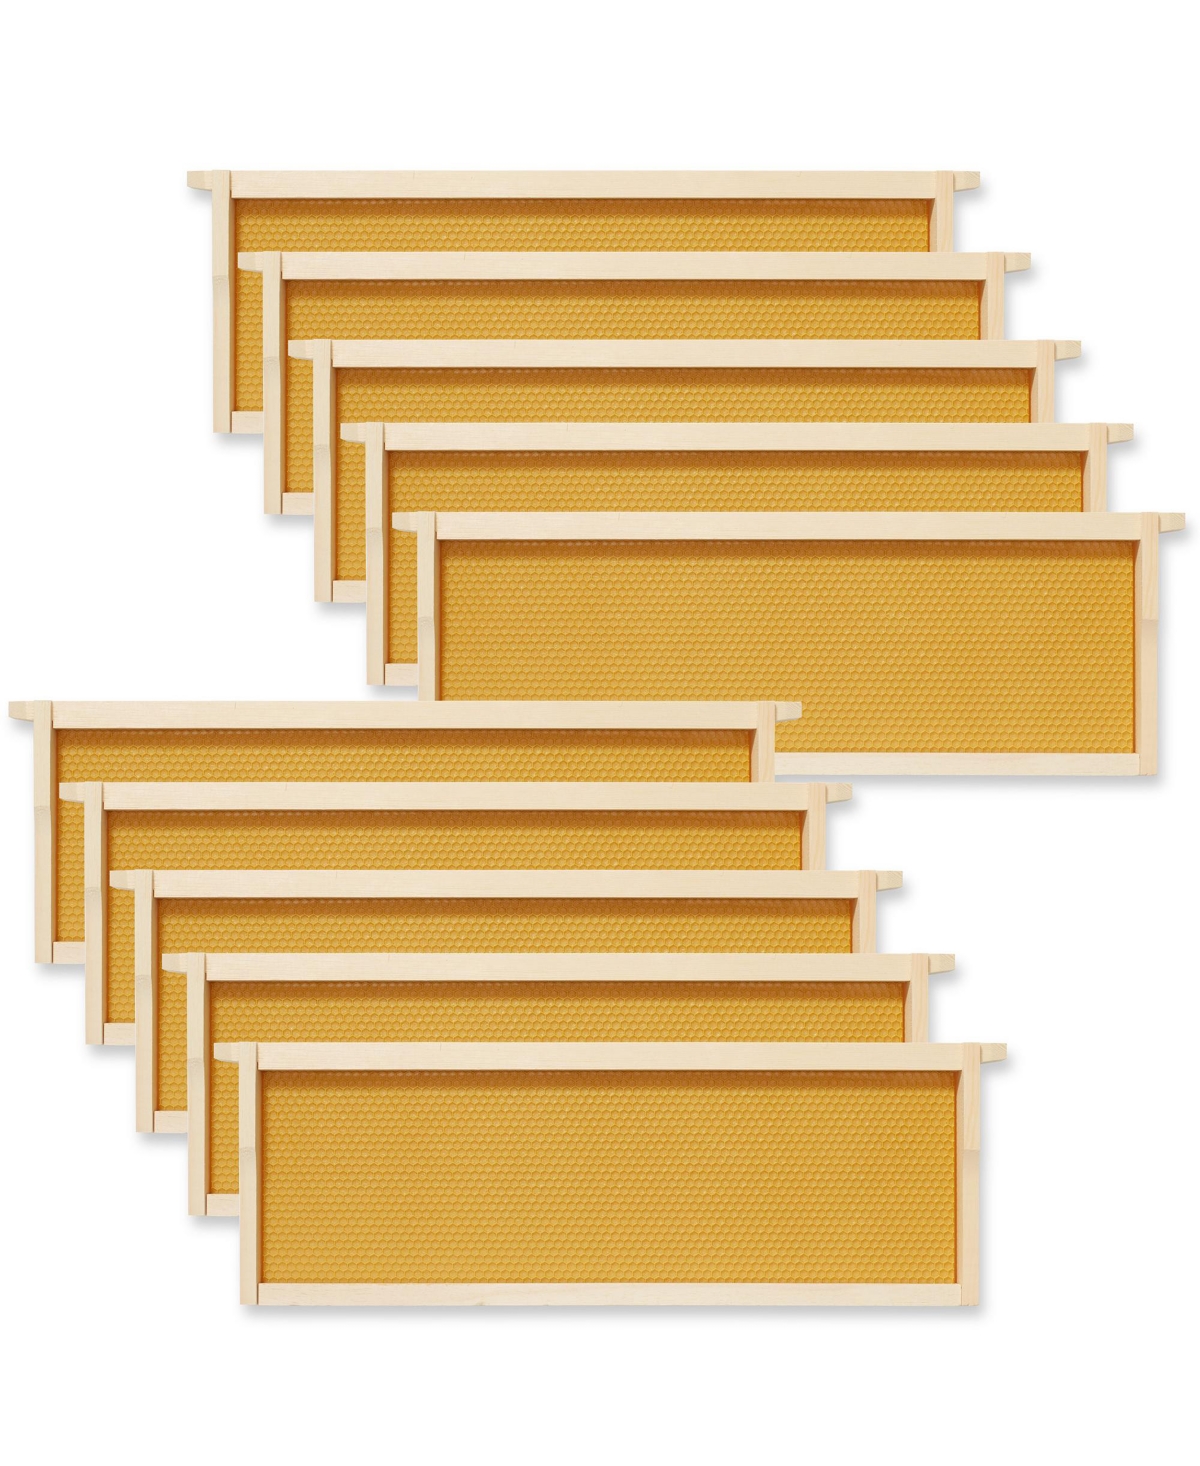 10 Assembled Beehive Frames with Waxed Natural Foundations for Beekeeping, 6-1/4 inch - Natural